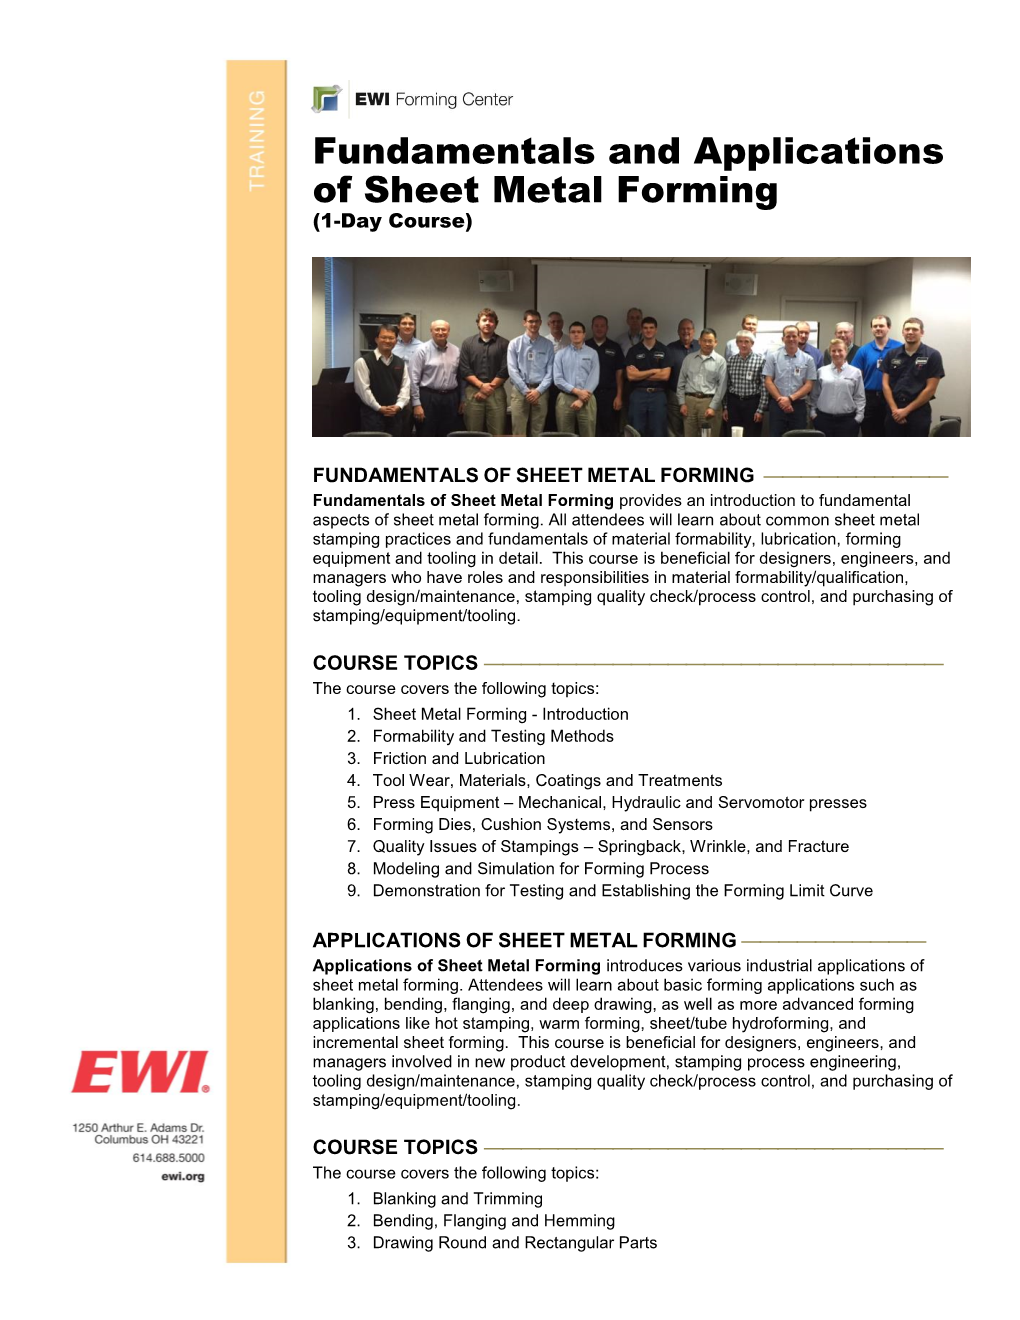 Fundamentals and Applications of Sheet Metal Forming (1-Day Course)